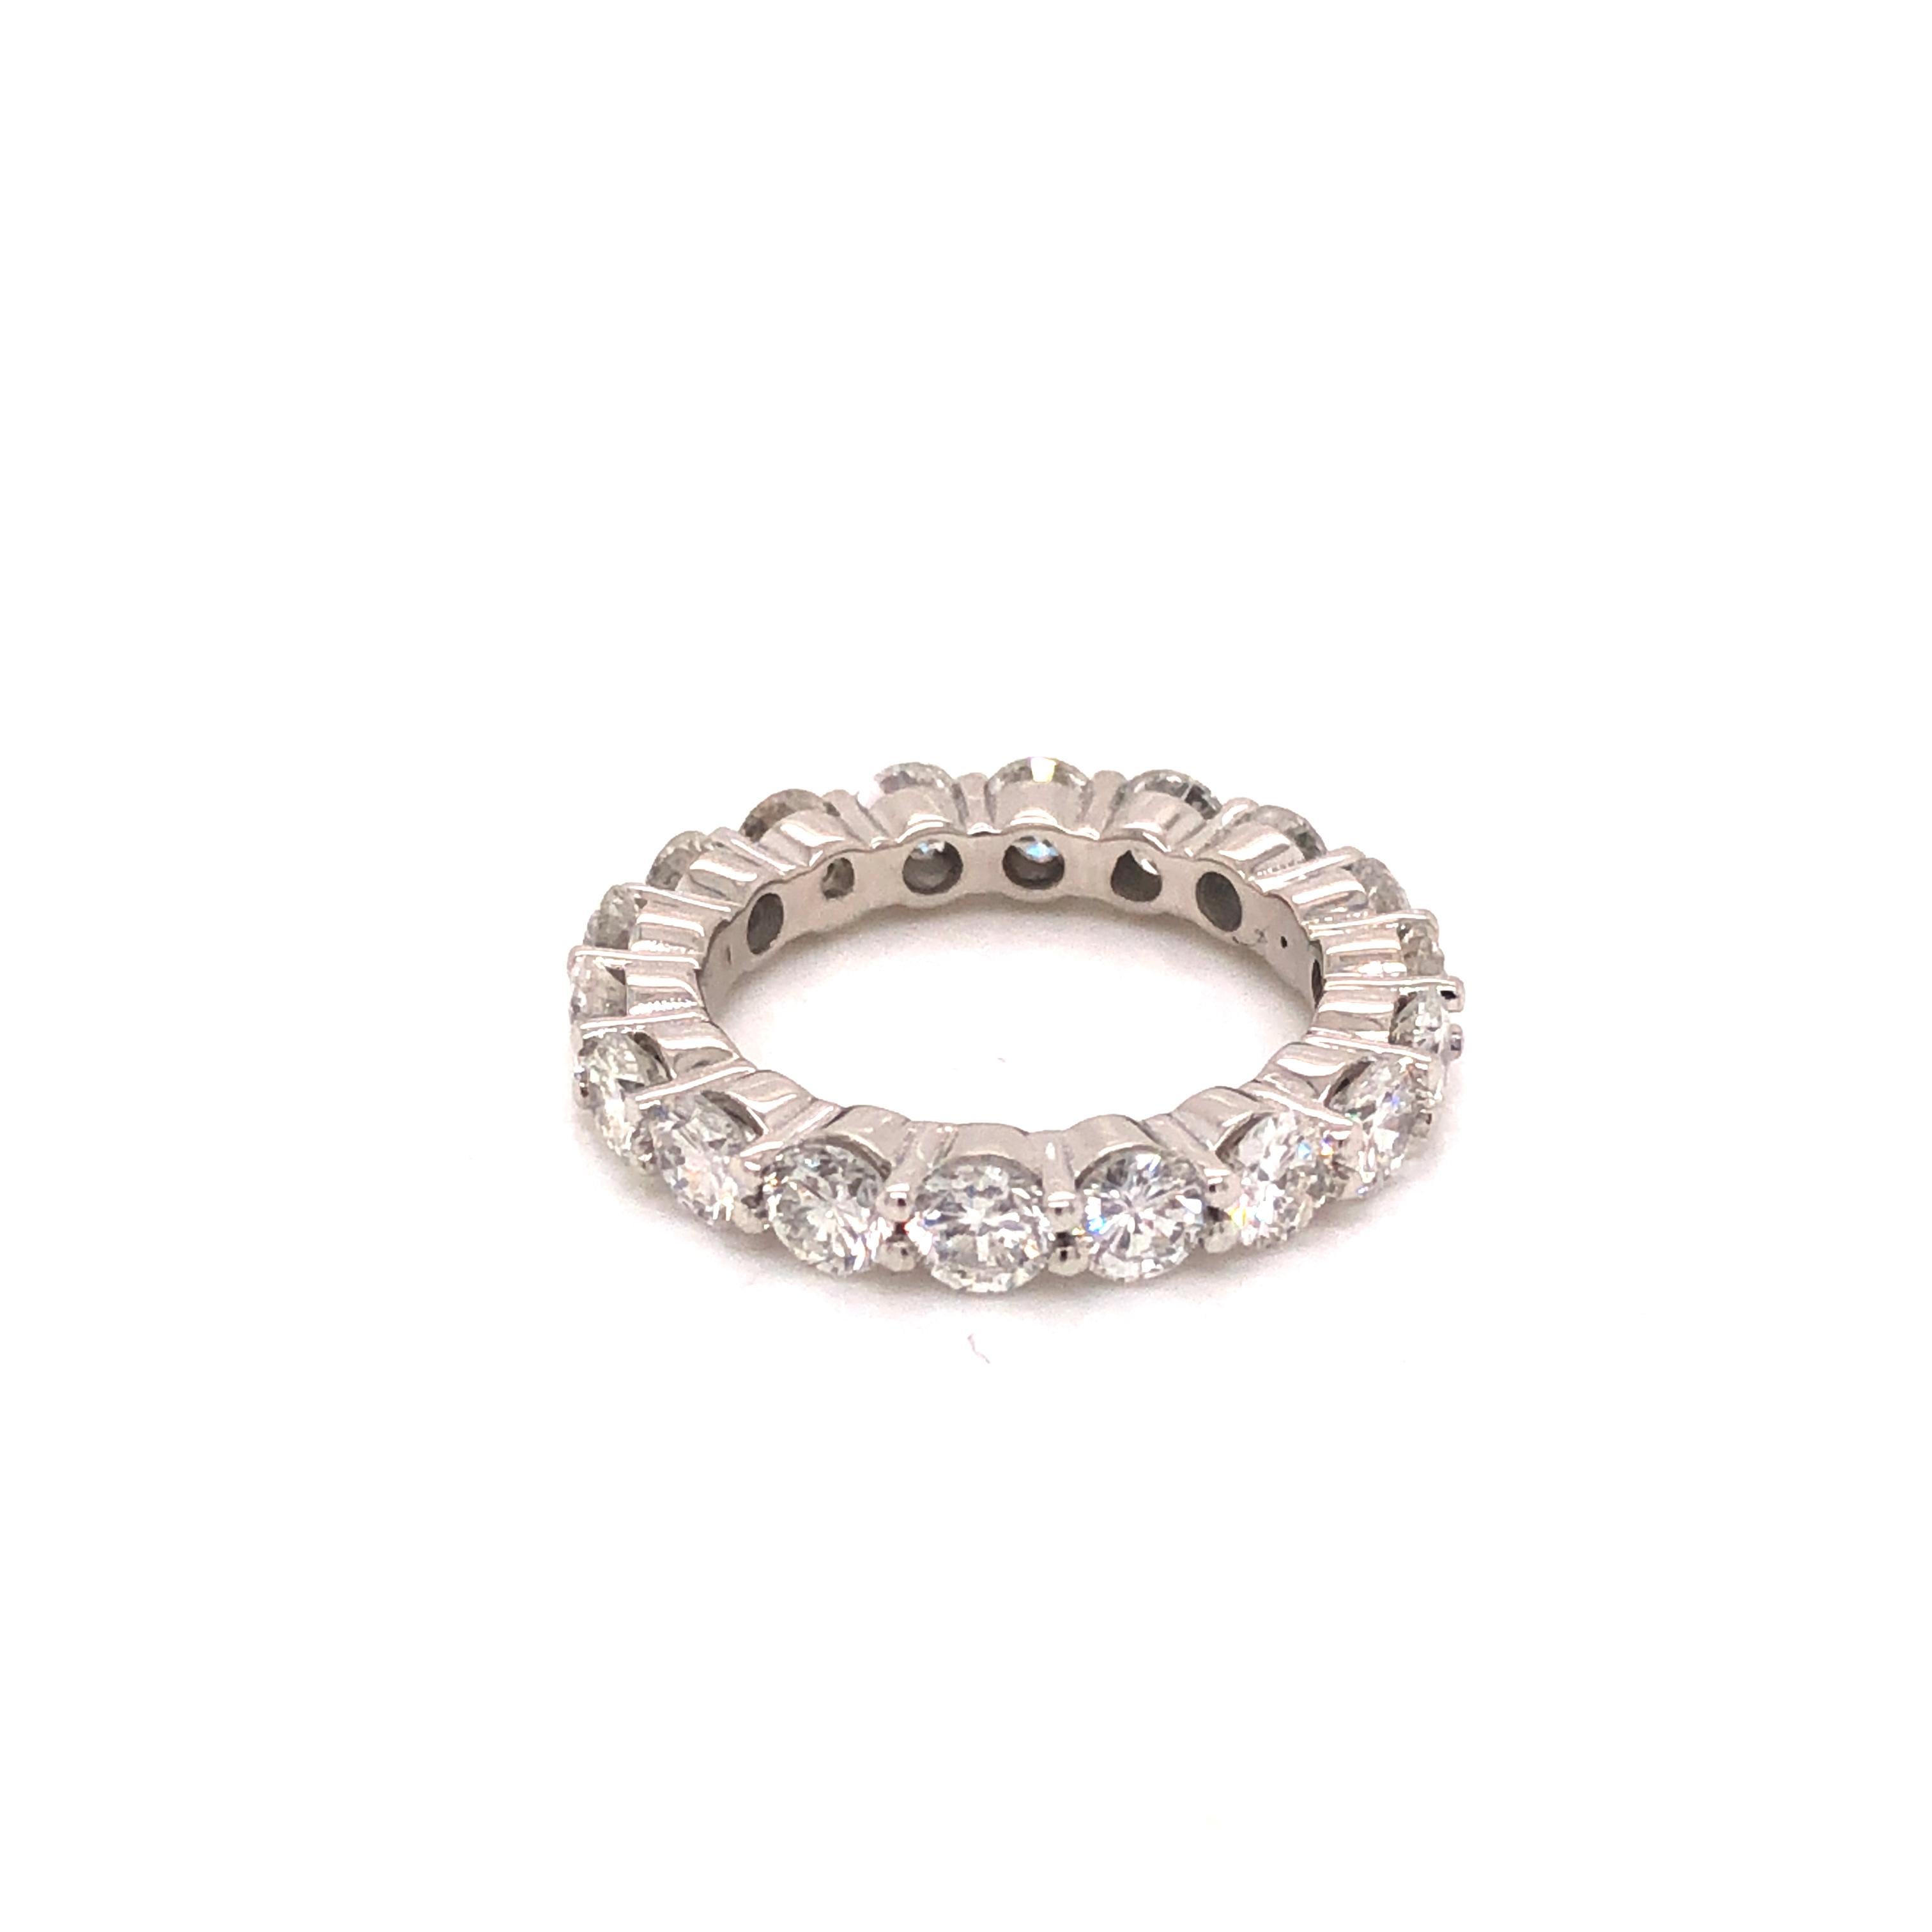 A 14K white gold eternity band consisting of 18 round-cut diamonds weighing a total of approximately 2.70 carat - VS clarity - GH color

Stone: Diamond ~ 2.70 carat

Metal: 14K White Gold

Ring Size: 5 US

Total Weight: 3.8 grams
